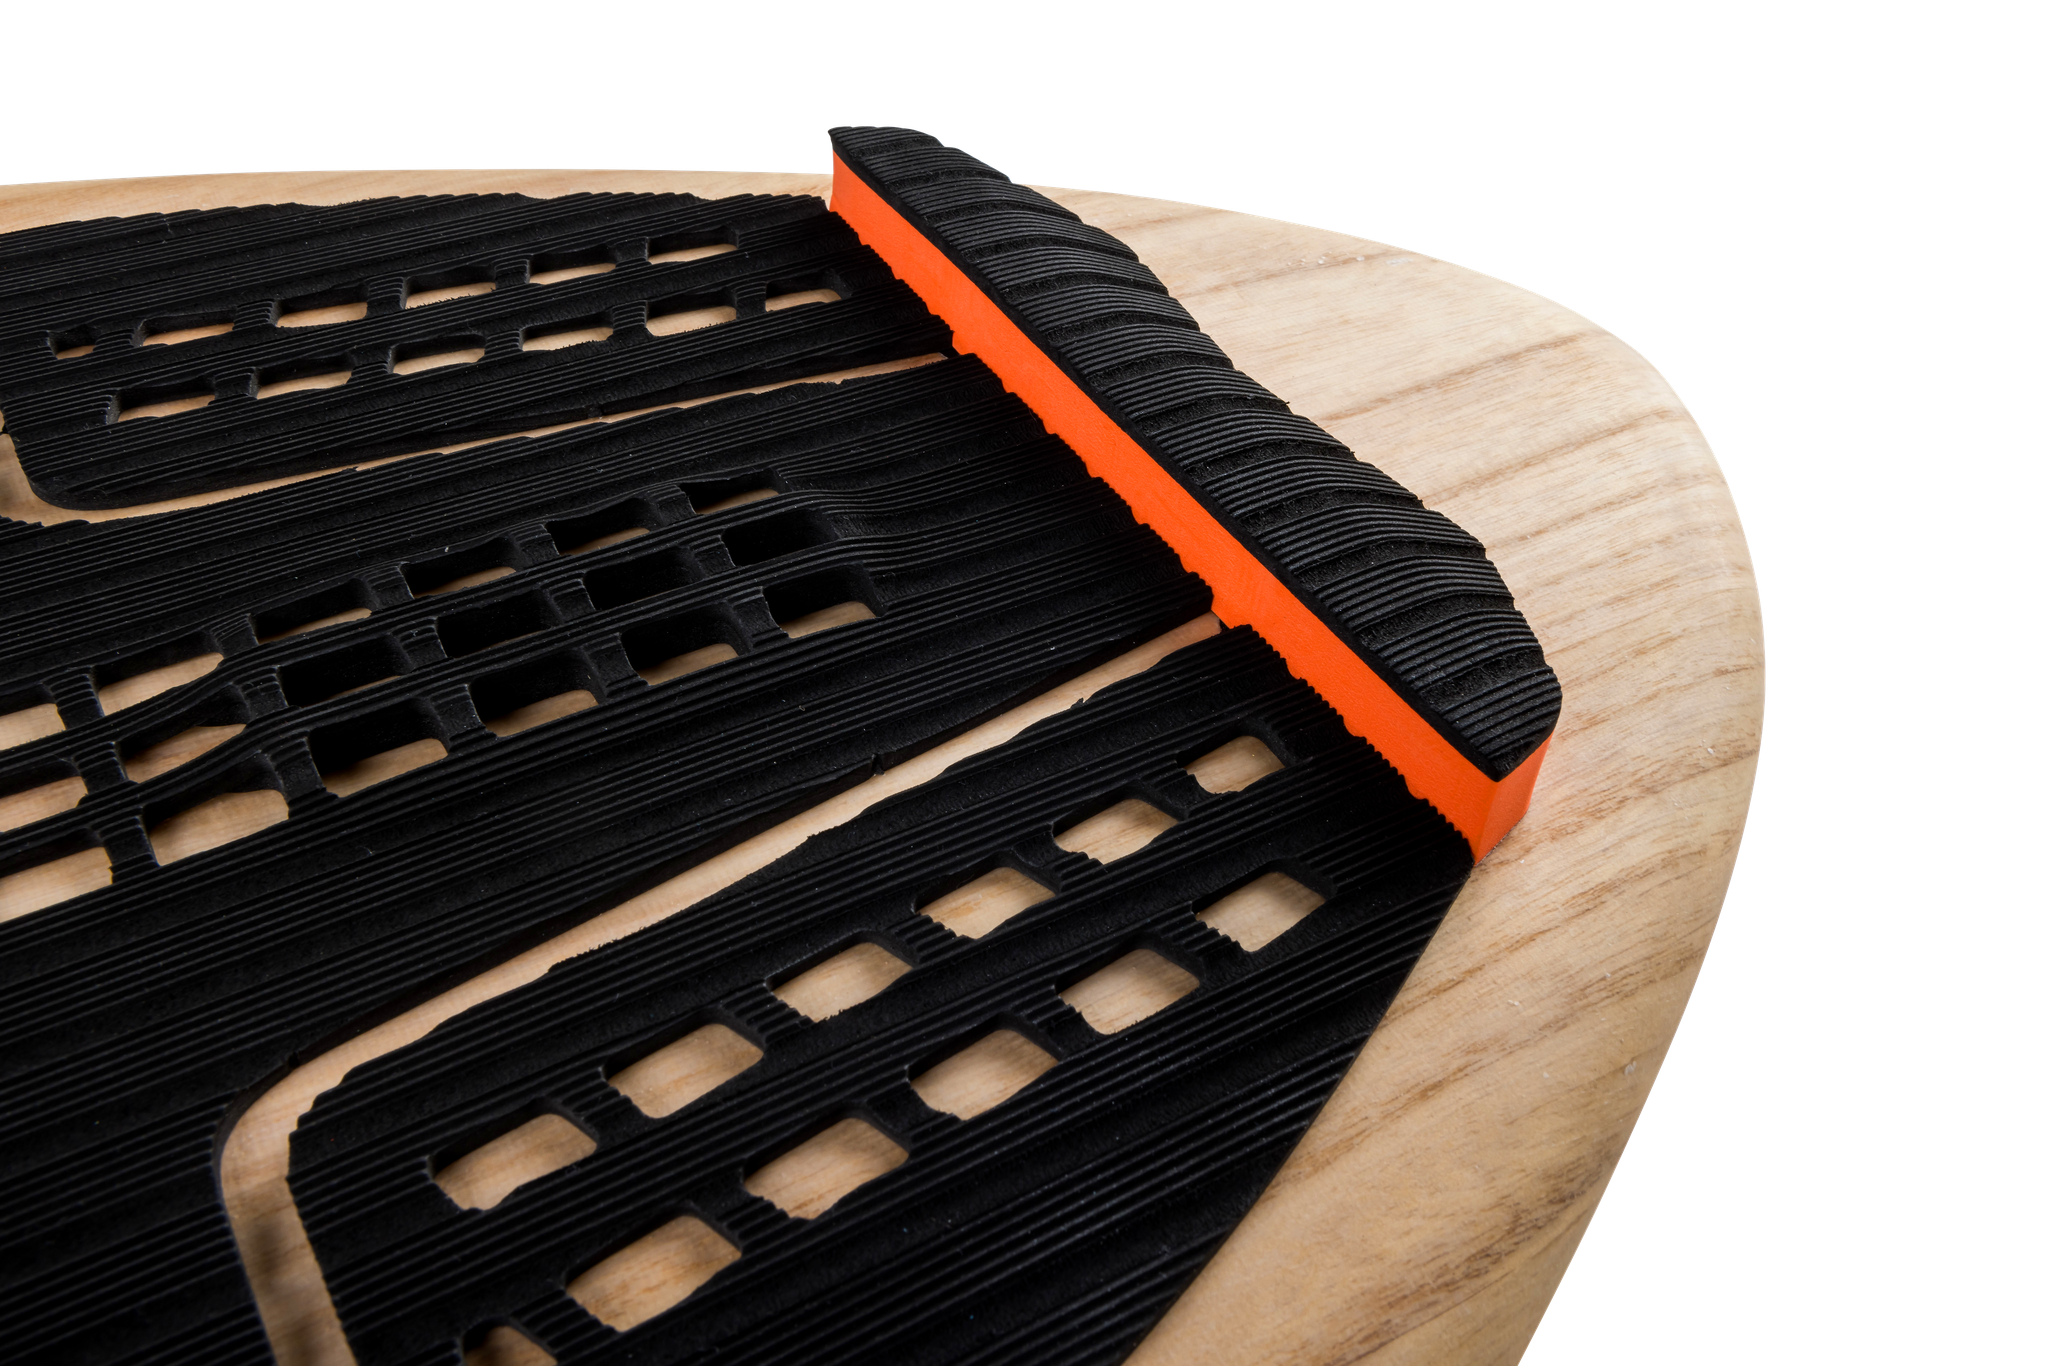 A black and orange Ronix 2024 Element Core Blunt Nose Skimmer, designed for stability and suitable for both surfing and skimming, placed on a sleek black surface.